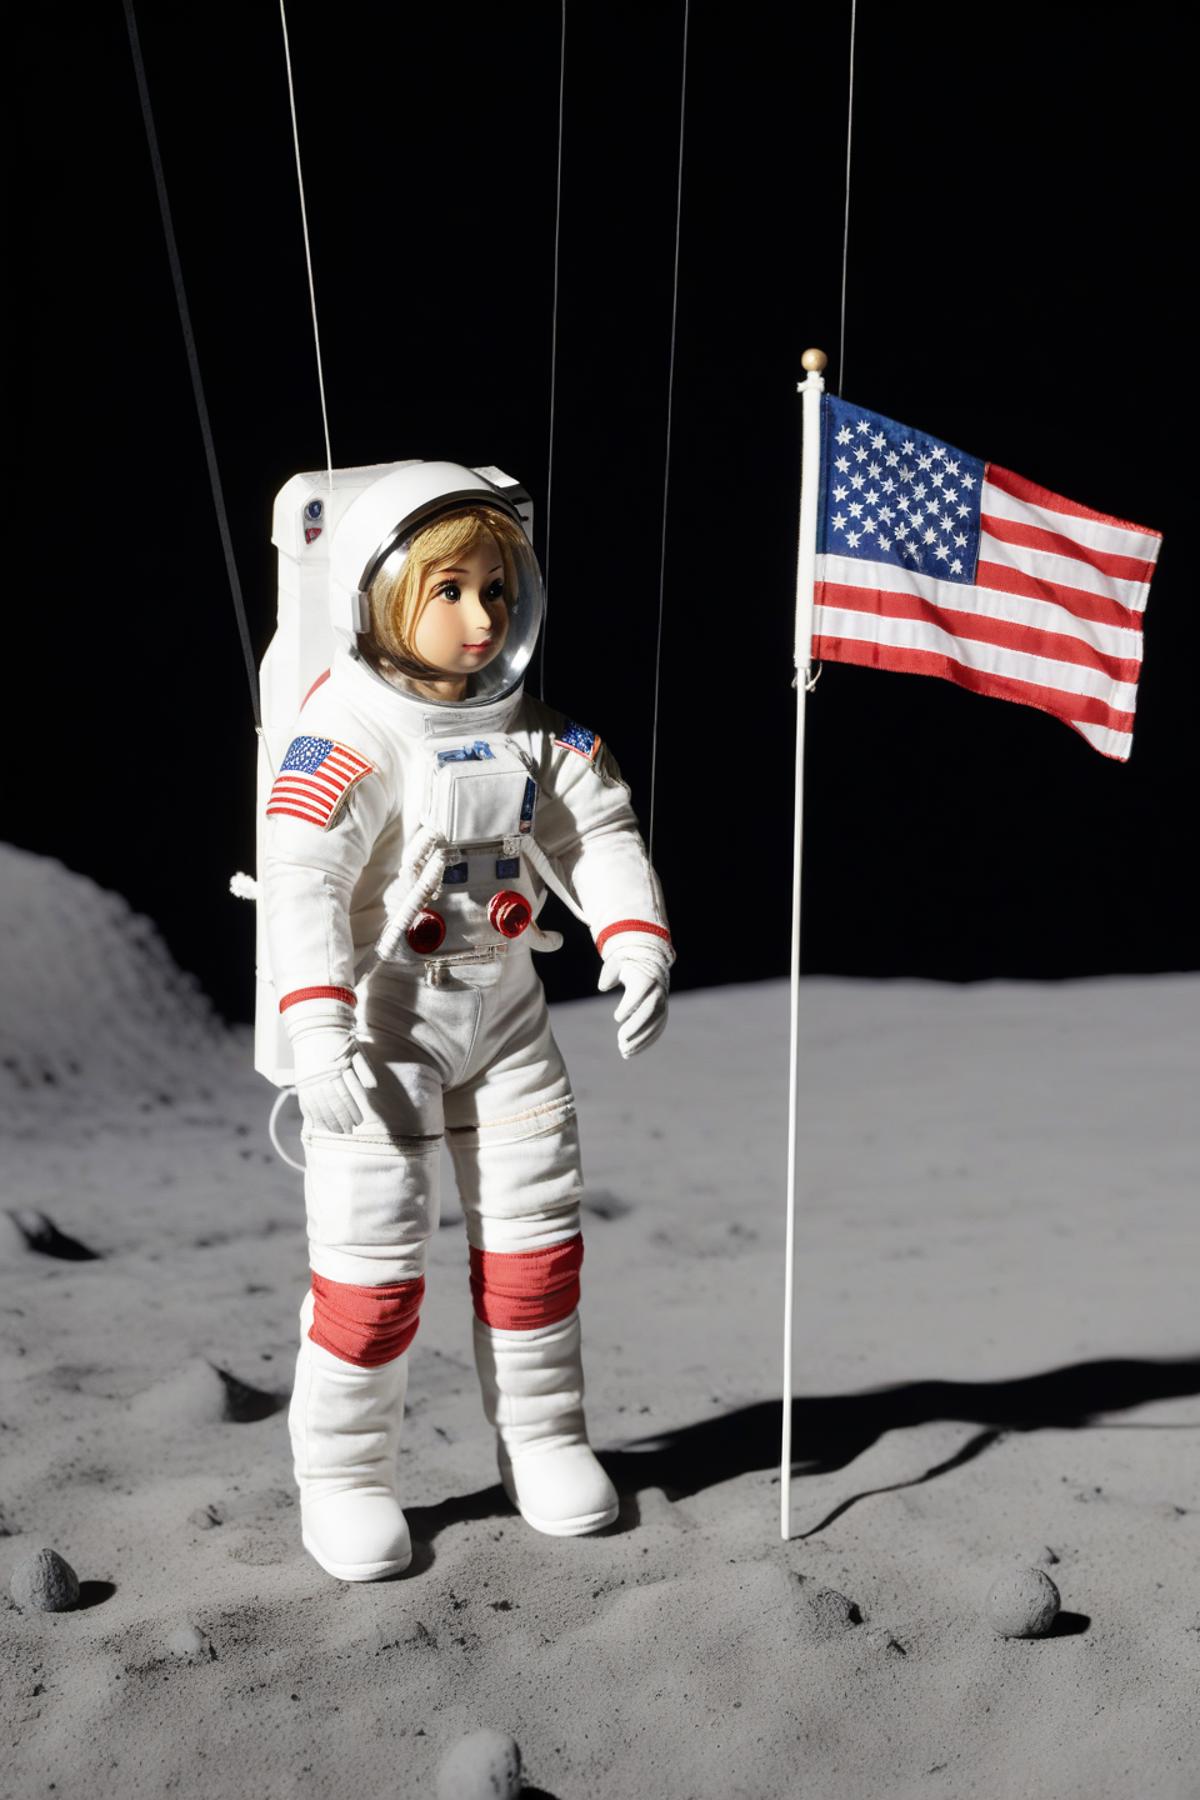 A doll astronaut standing in front of an American flag.